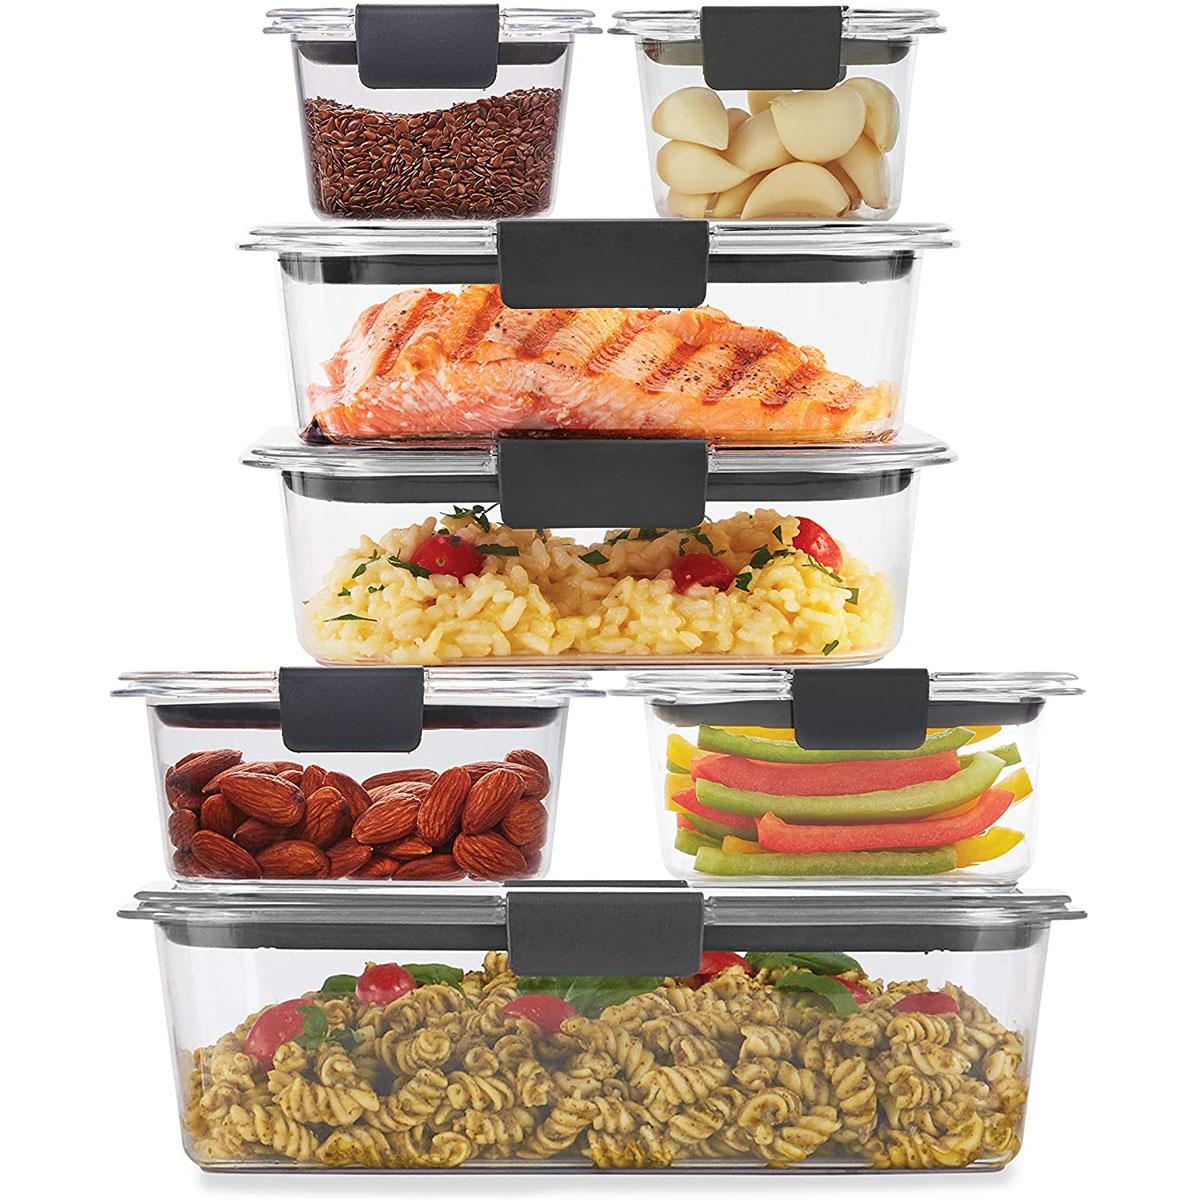 14-Piece Rubbermaid Brilliance Food Storage Containers for $22.49